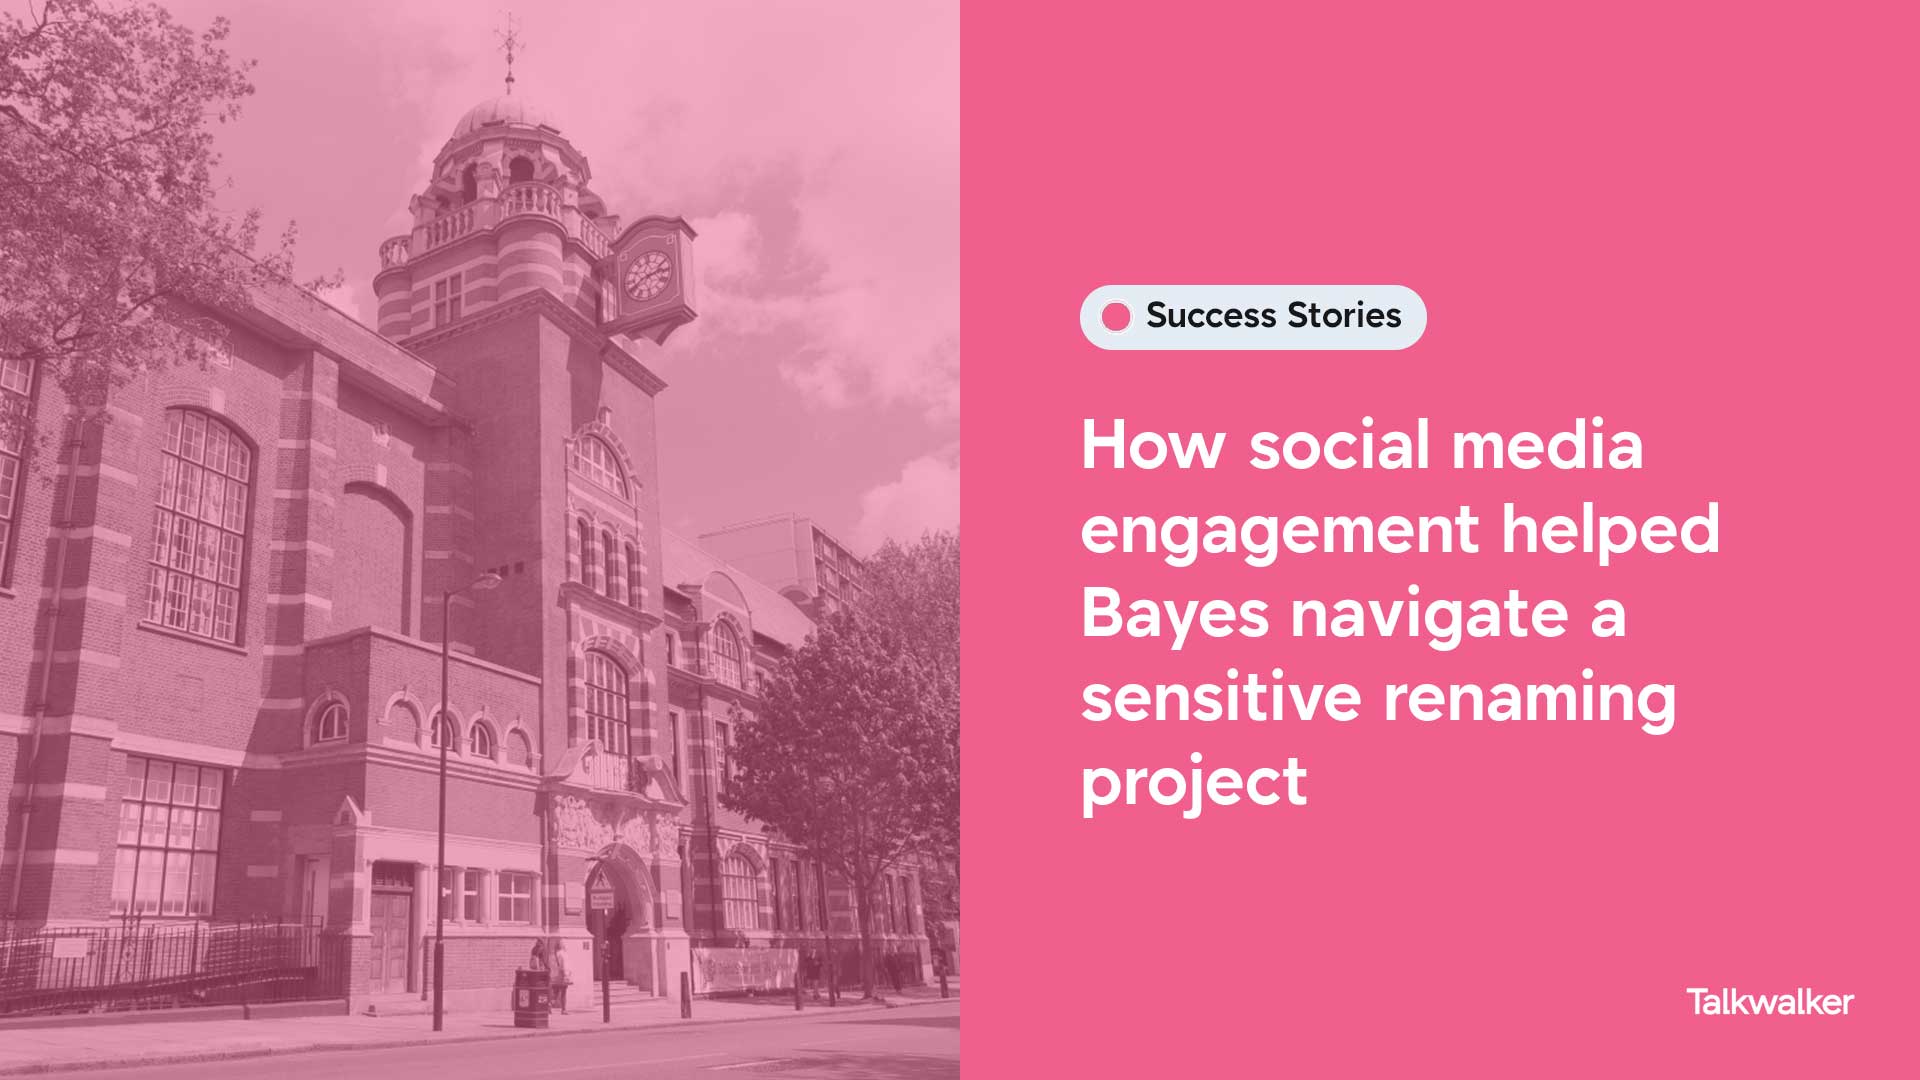 How social media engagement helped Bayes navigate a sensitive renaming project